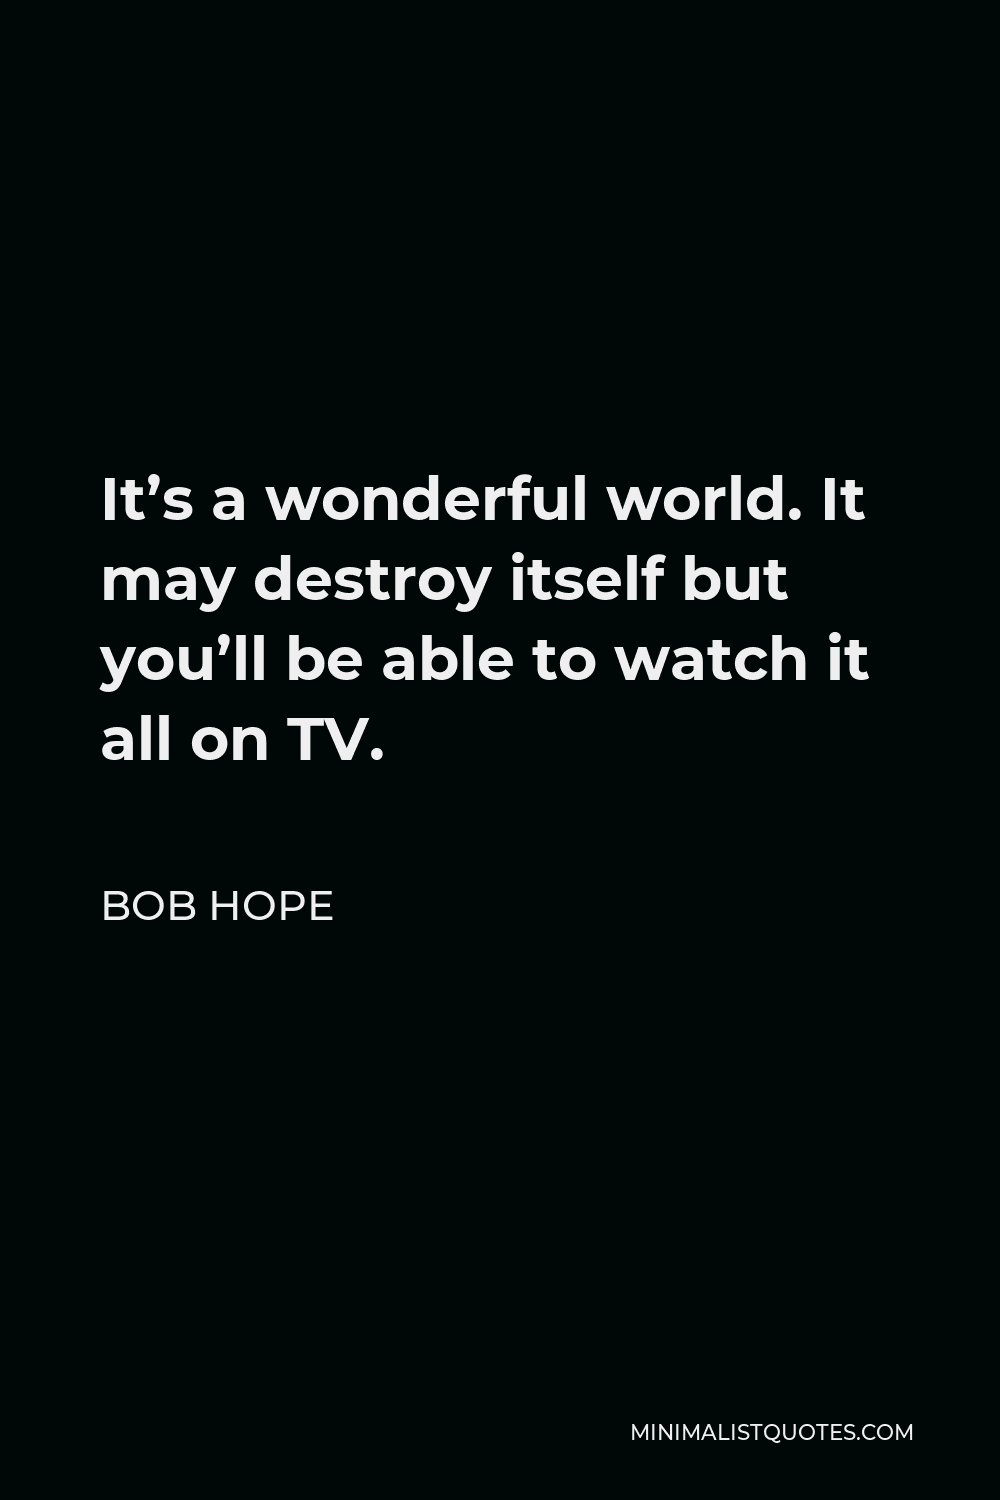 Bob Hope Quote - It’s a wonderful world. It may destroy itself but you’ll be able to watch it all on TV.